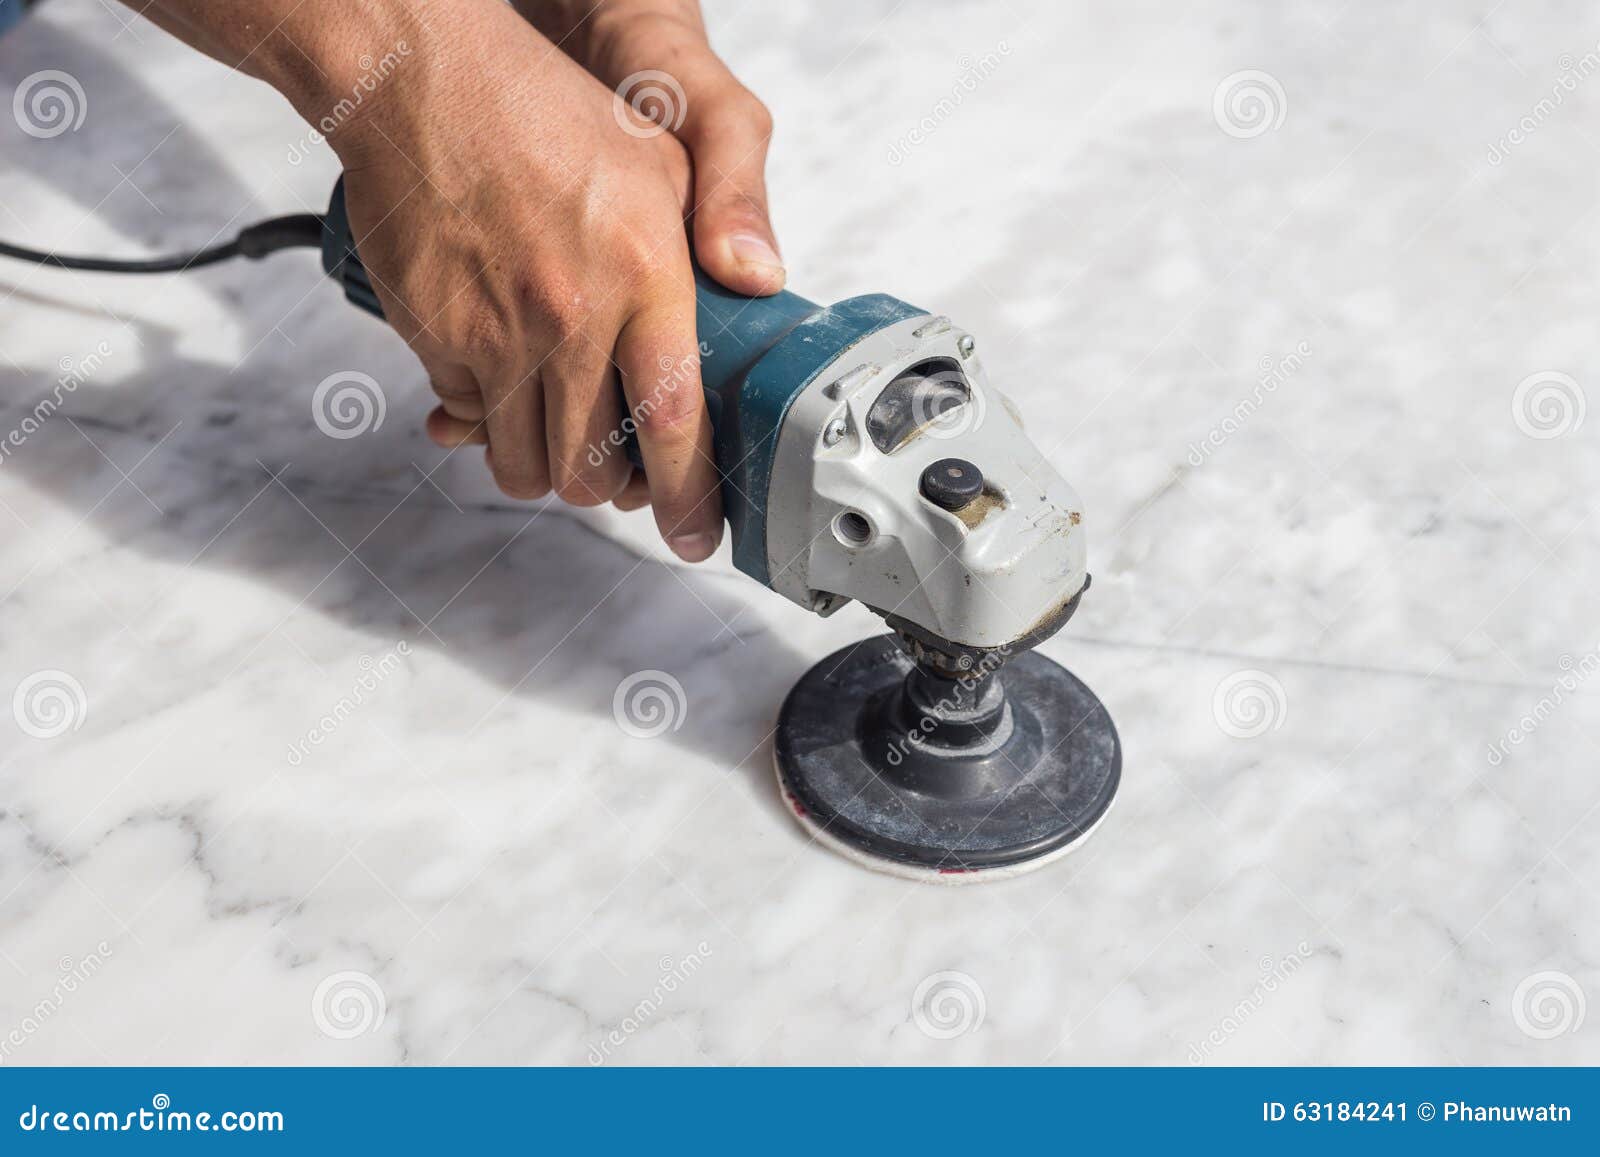 man polishing marble table by angle grinder